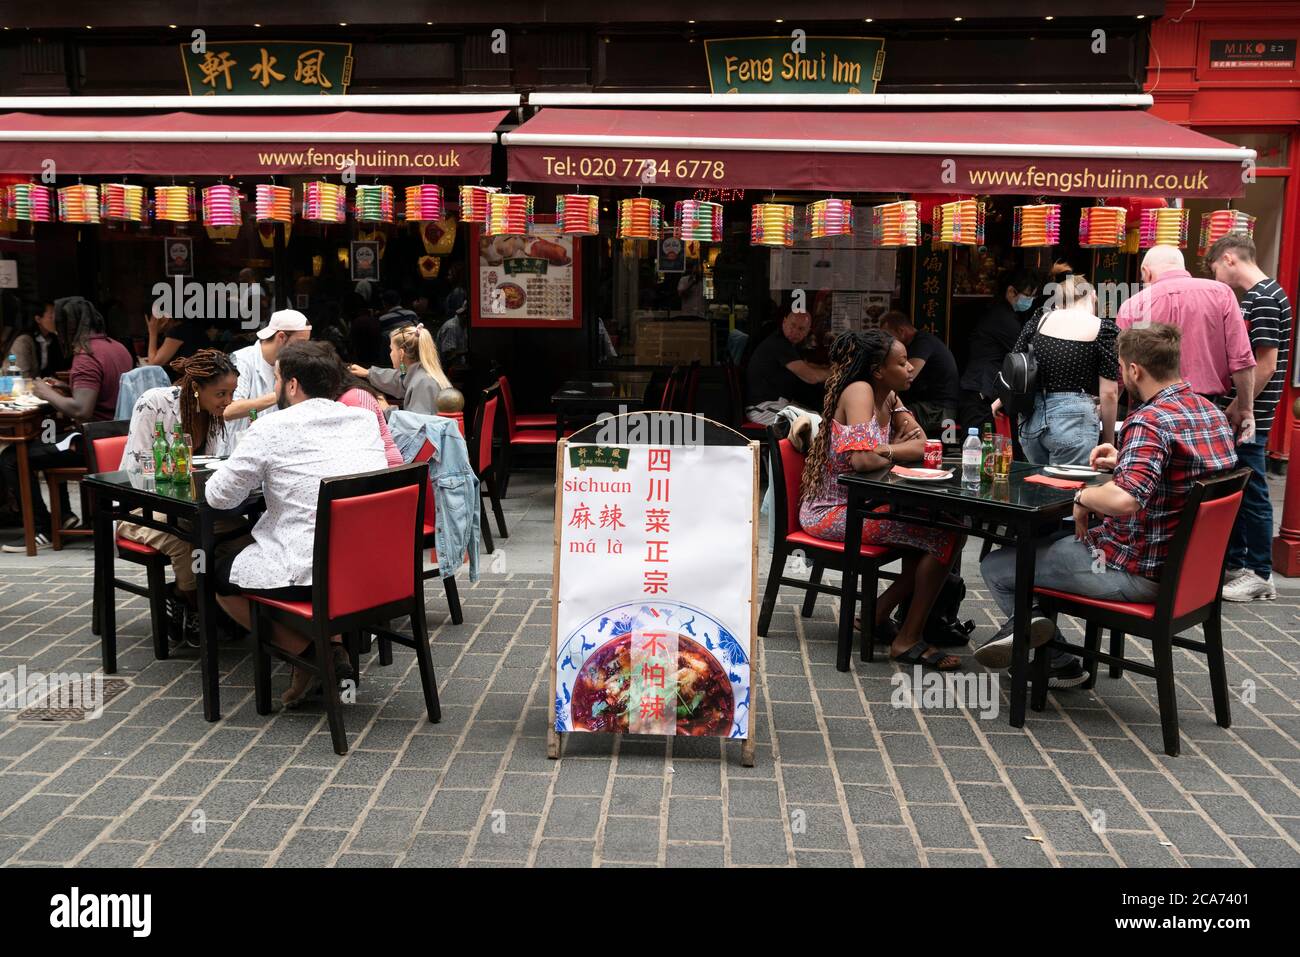 Diners eat food at outdoor restaurant tables in Chinatown during the Eat Out to Help Out scheme offering diners a discount off meals to help boost restaurants and pubs post-lockdown. Stock Photo